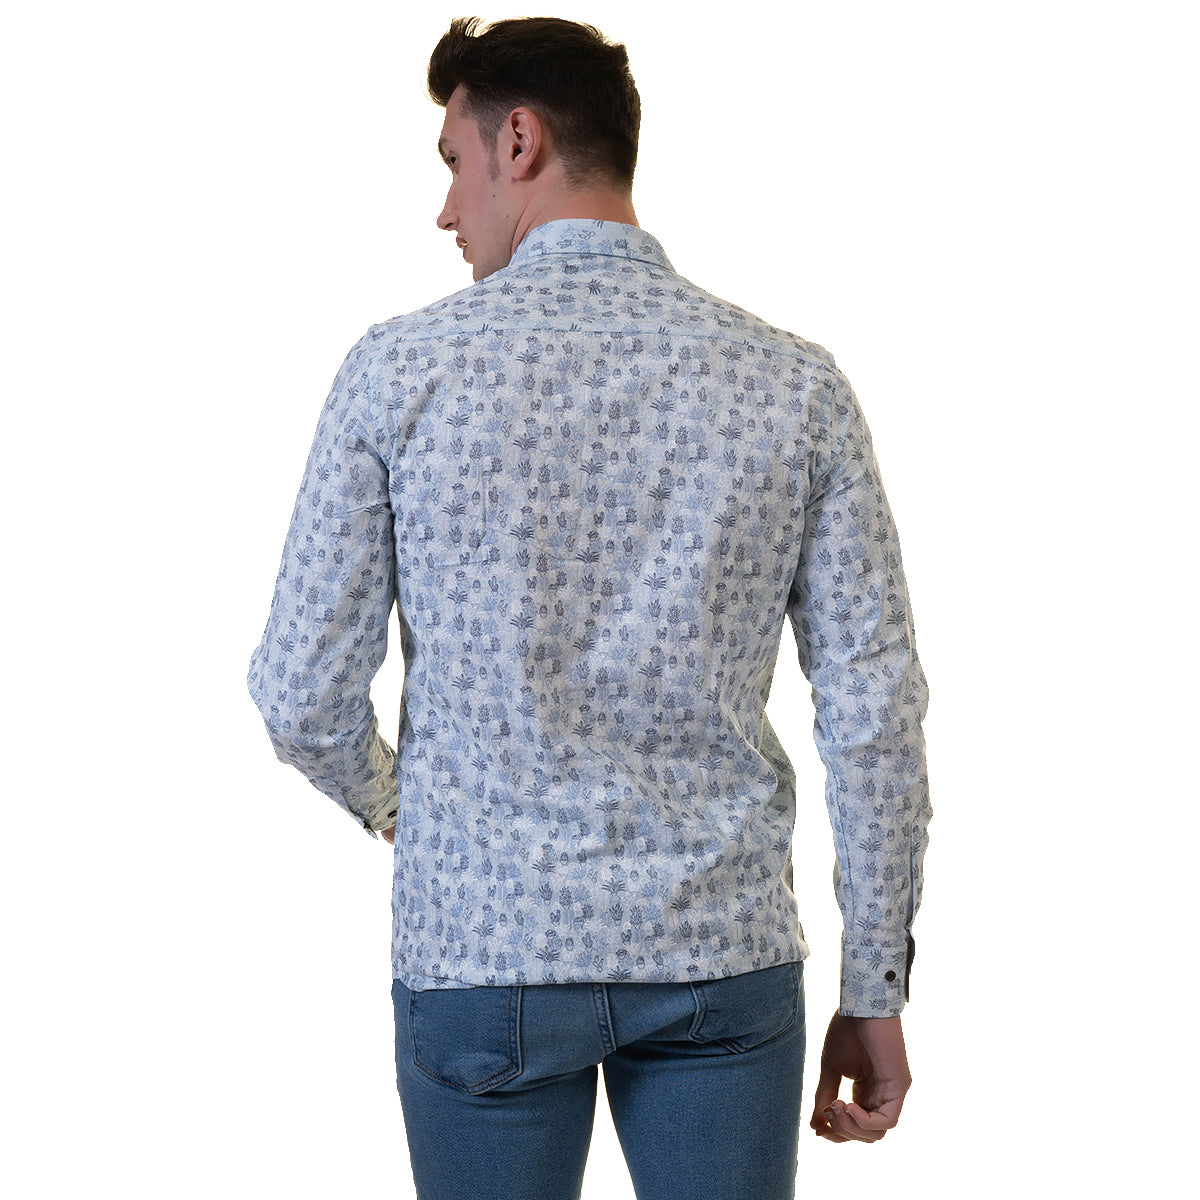 Light Blue Floral Mens Slim Fit Designer Dress Shirt - tailored Cotton Shirts for Work and Casual Wear